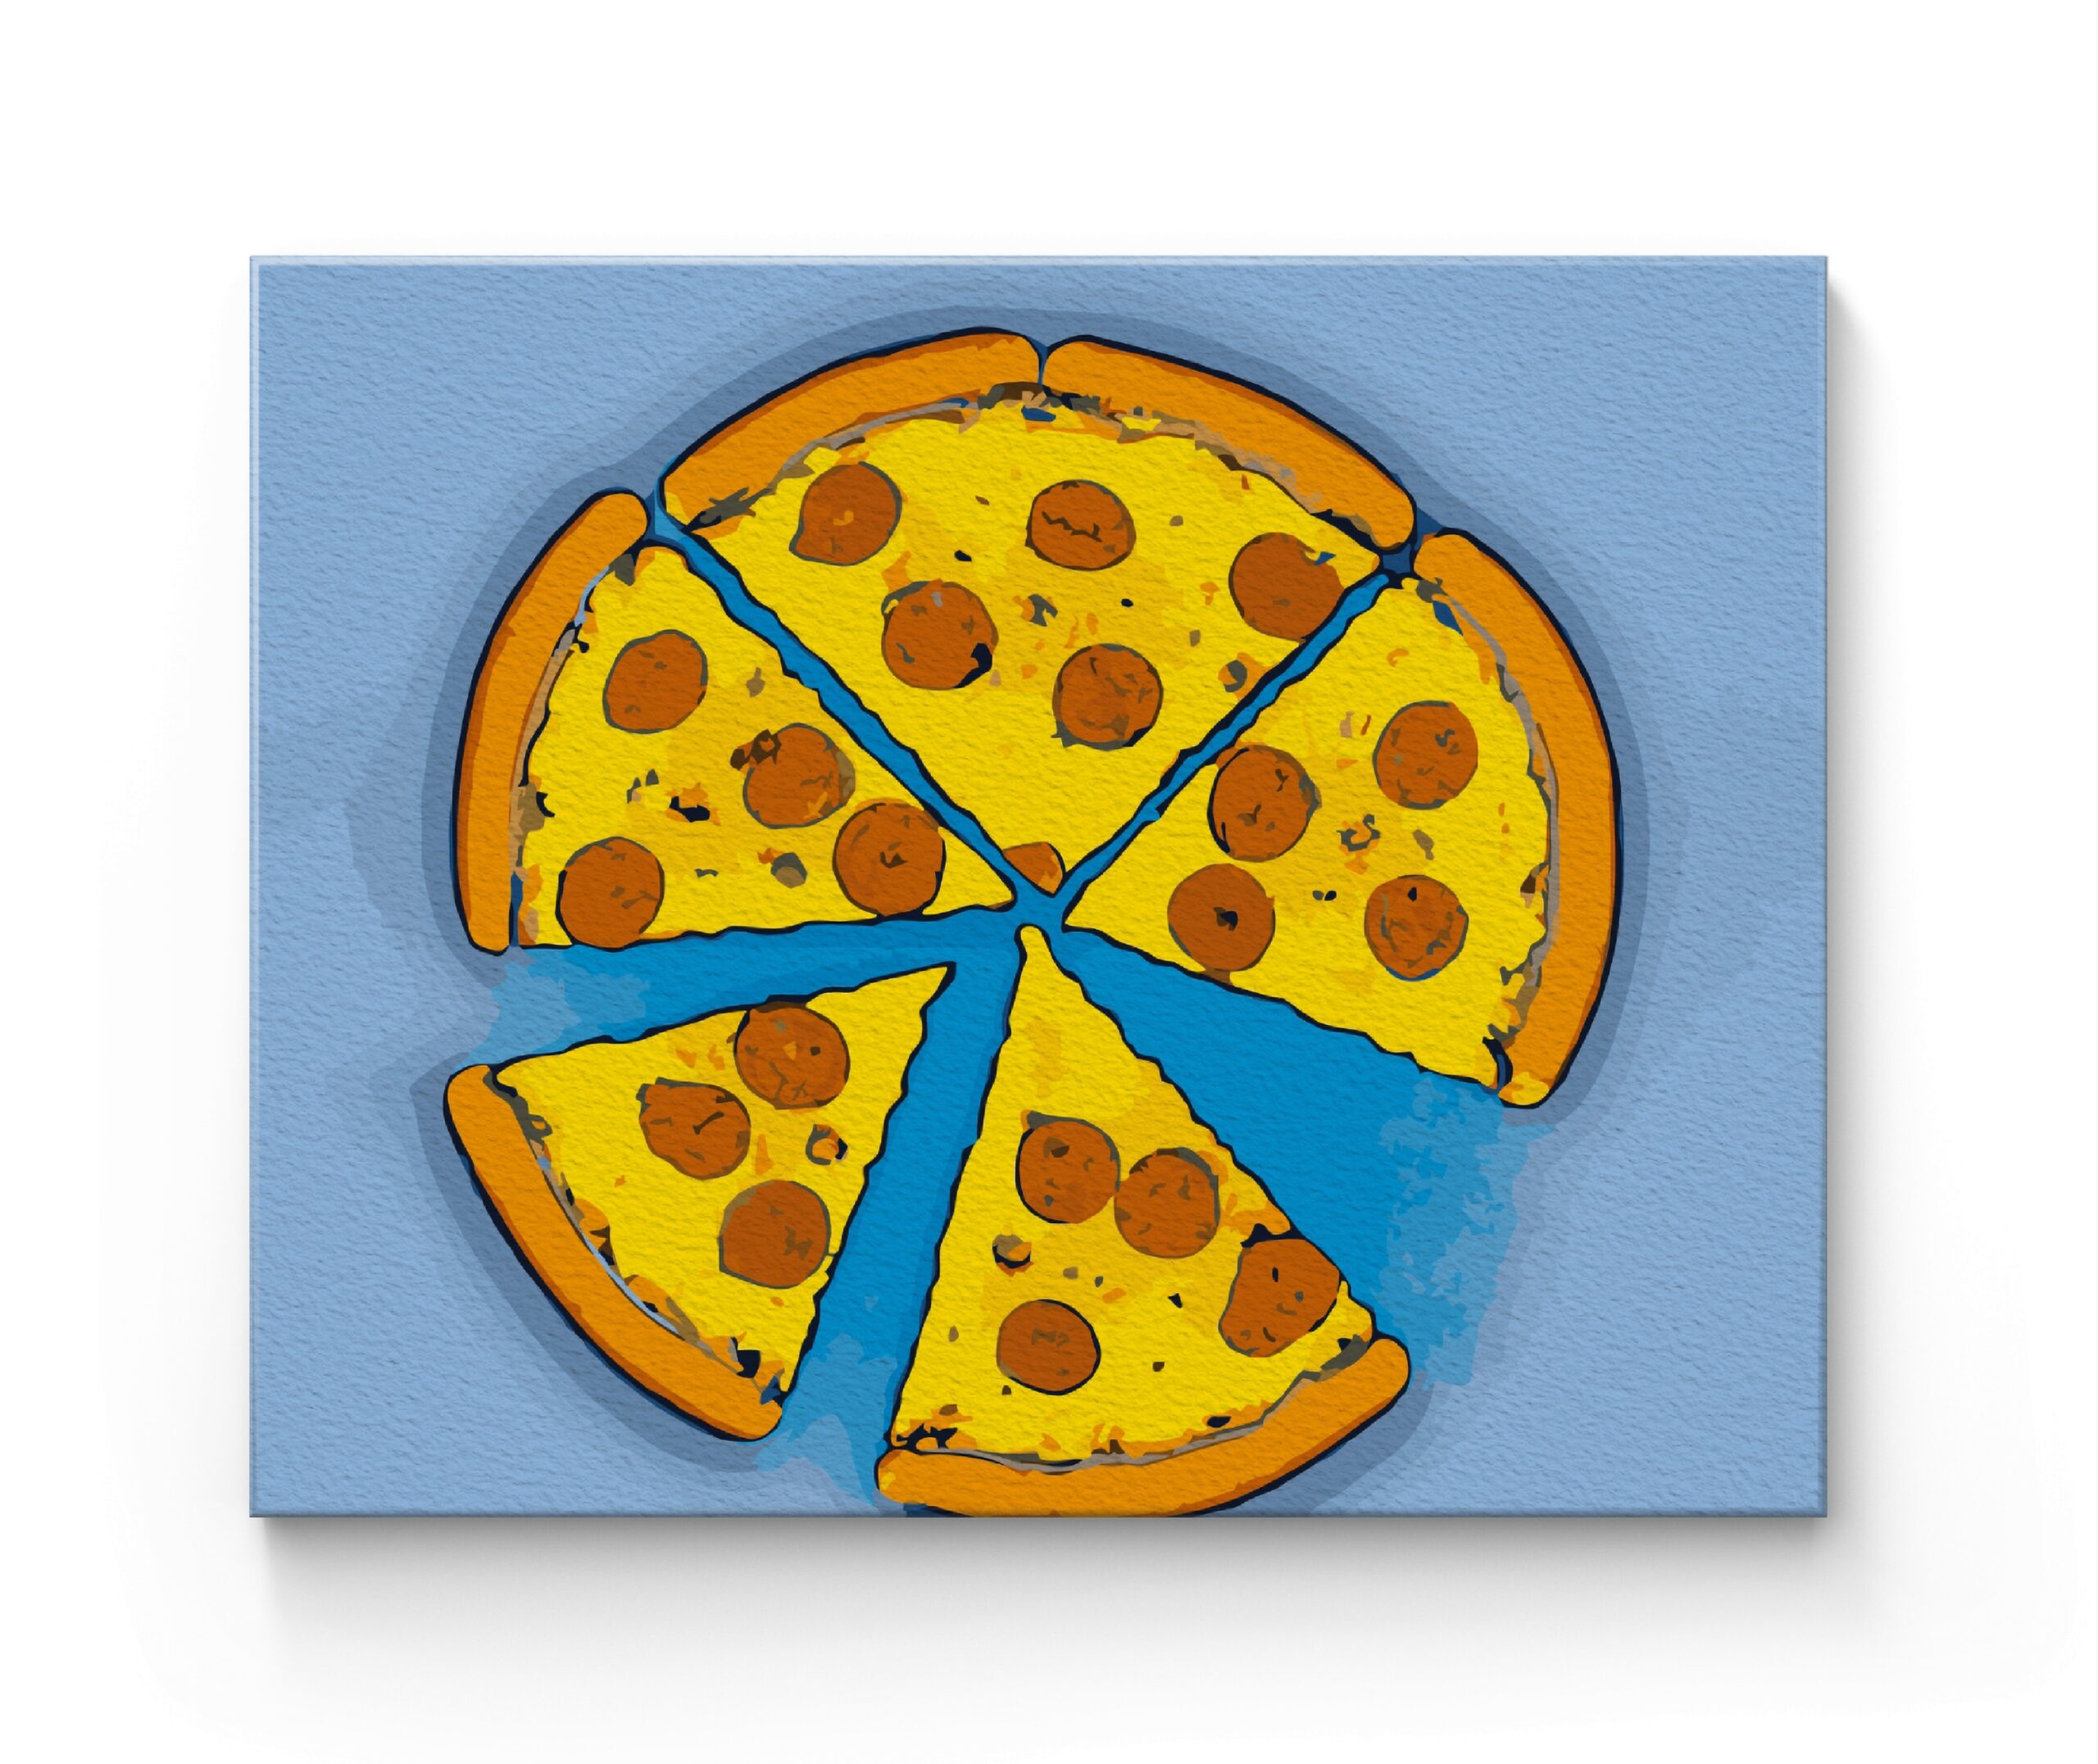 How to Draw a Pizza Slice in MS Paint | Drawing Cartoon Pizza in Comput...  : r/mspaint